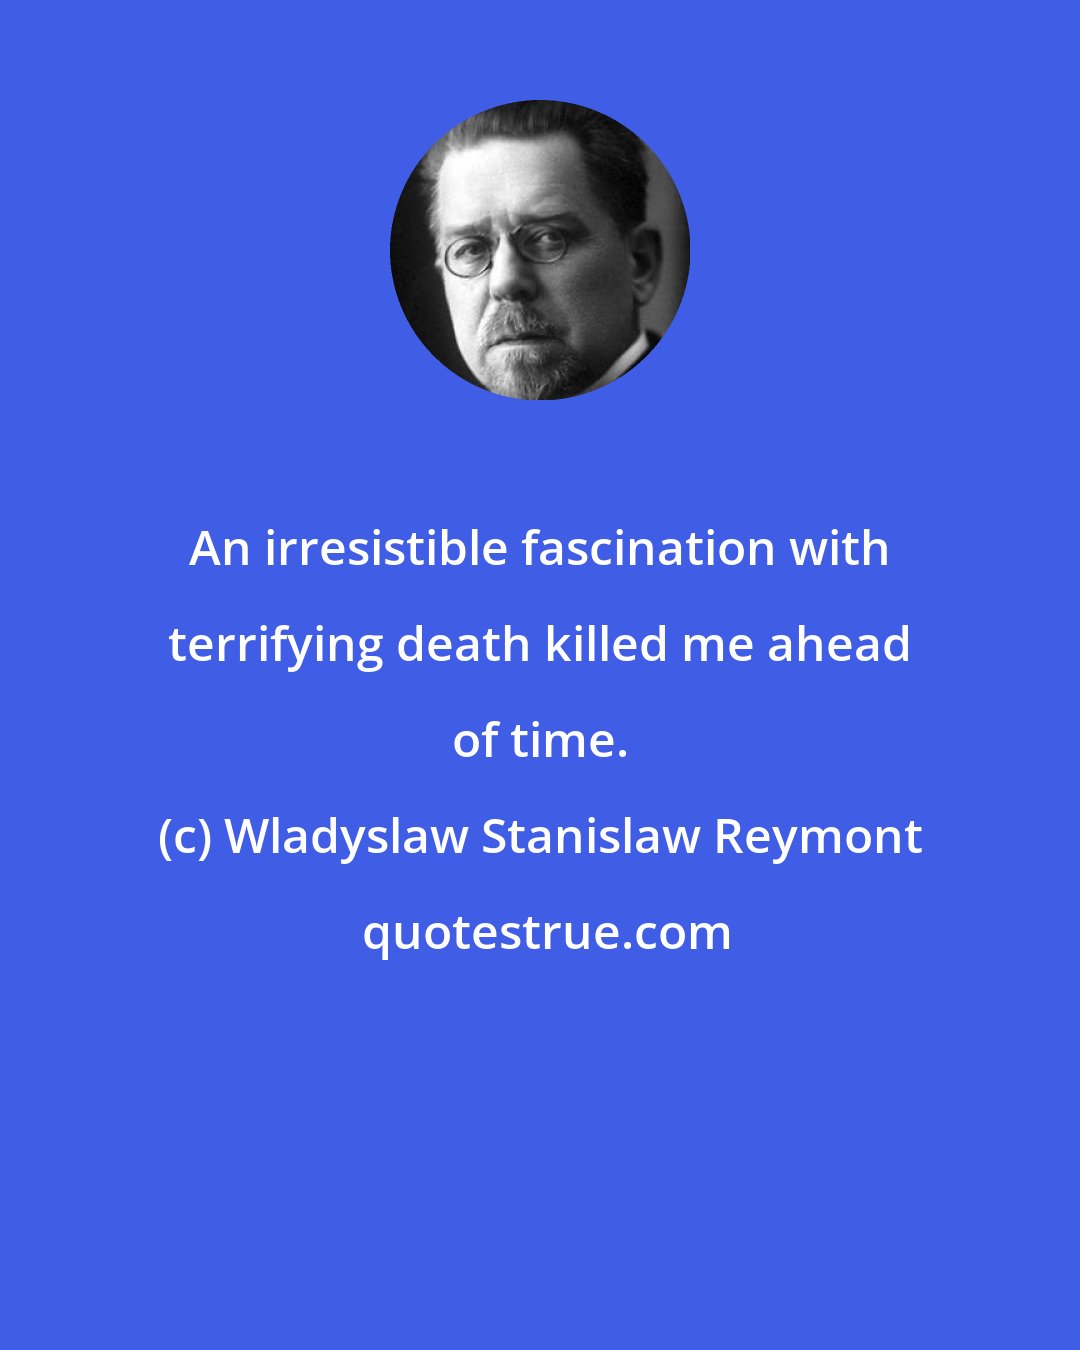 Wladyslaw Stanislaw Reymont: An irresistible fascination with terrifying death killed me ahead of time.